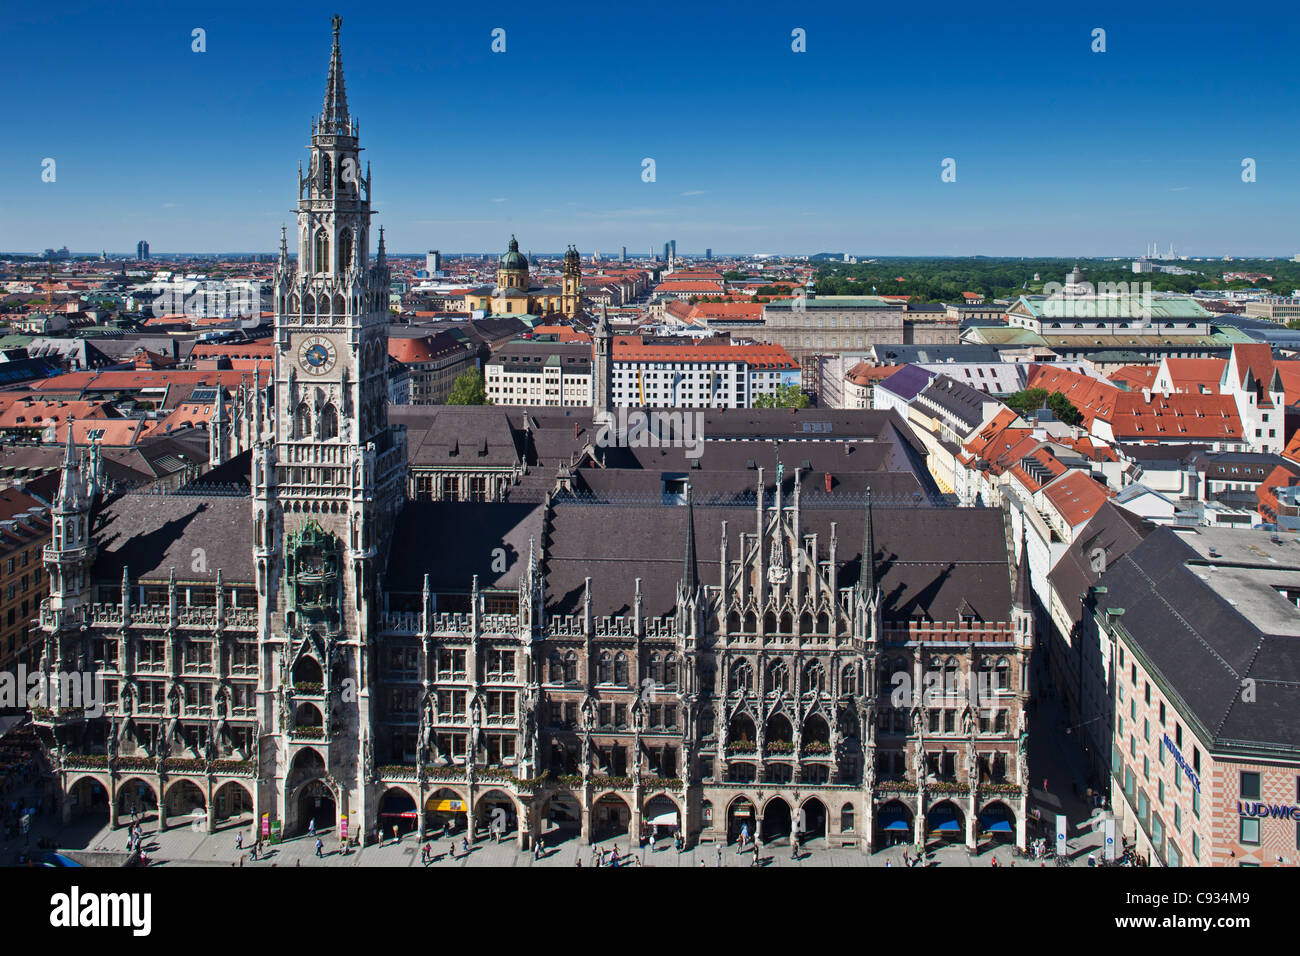 The Munich Rathaus Glockenspiel viewed from the steeple of St. Peter's Church in Munich, Bayern, Germany. Stock Photo